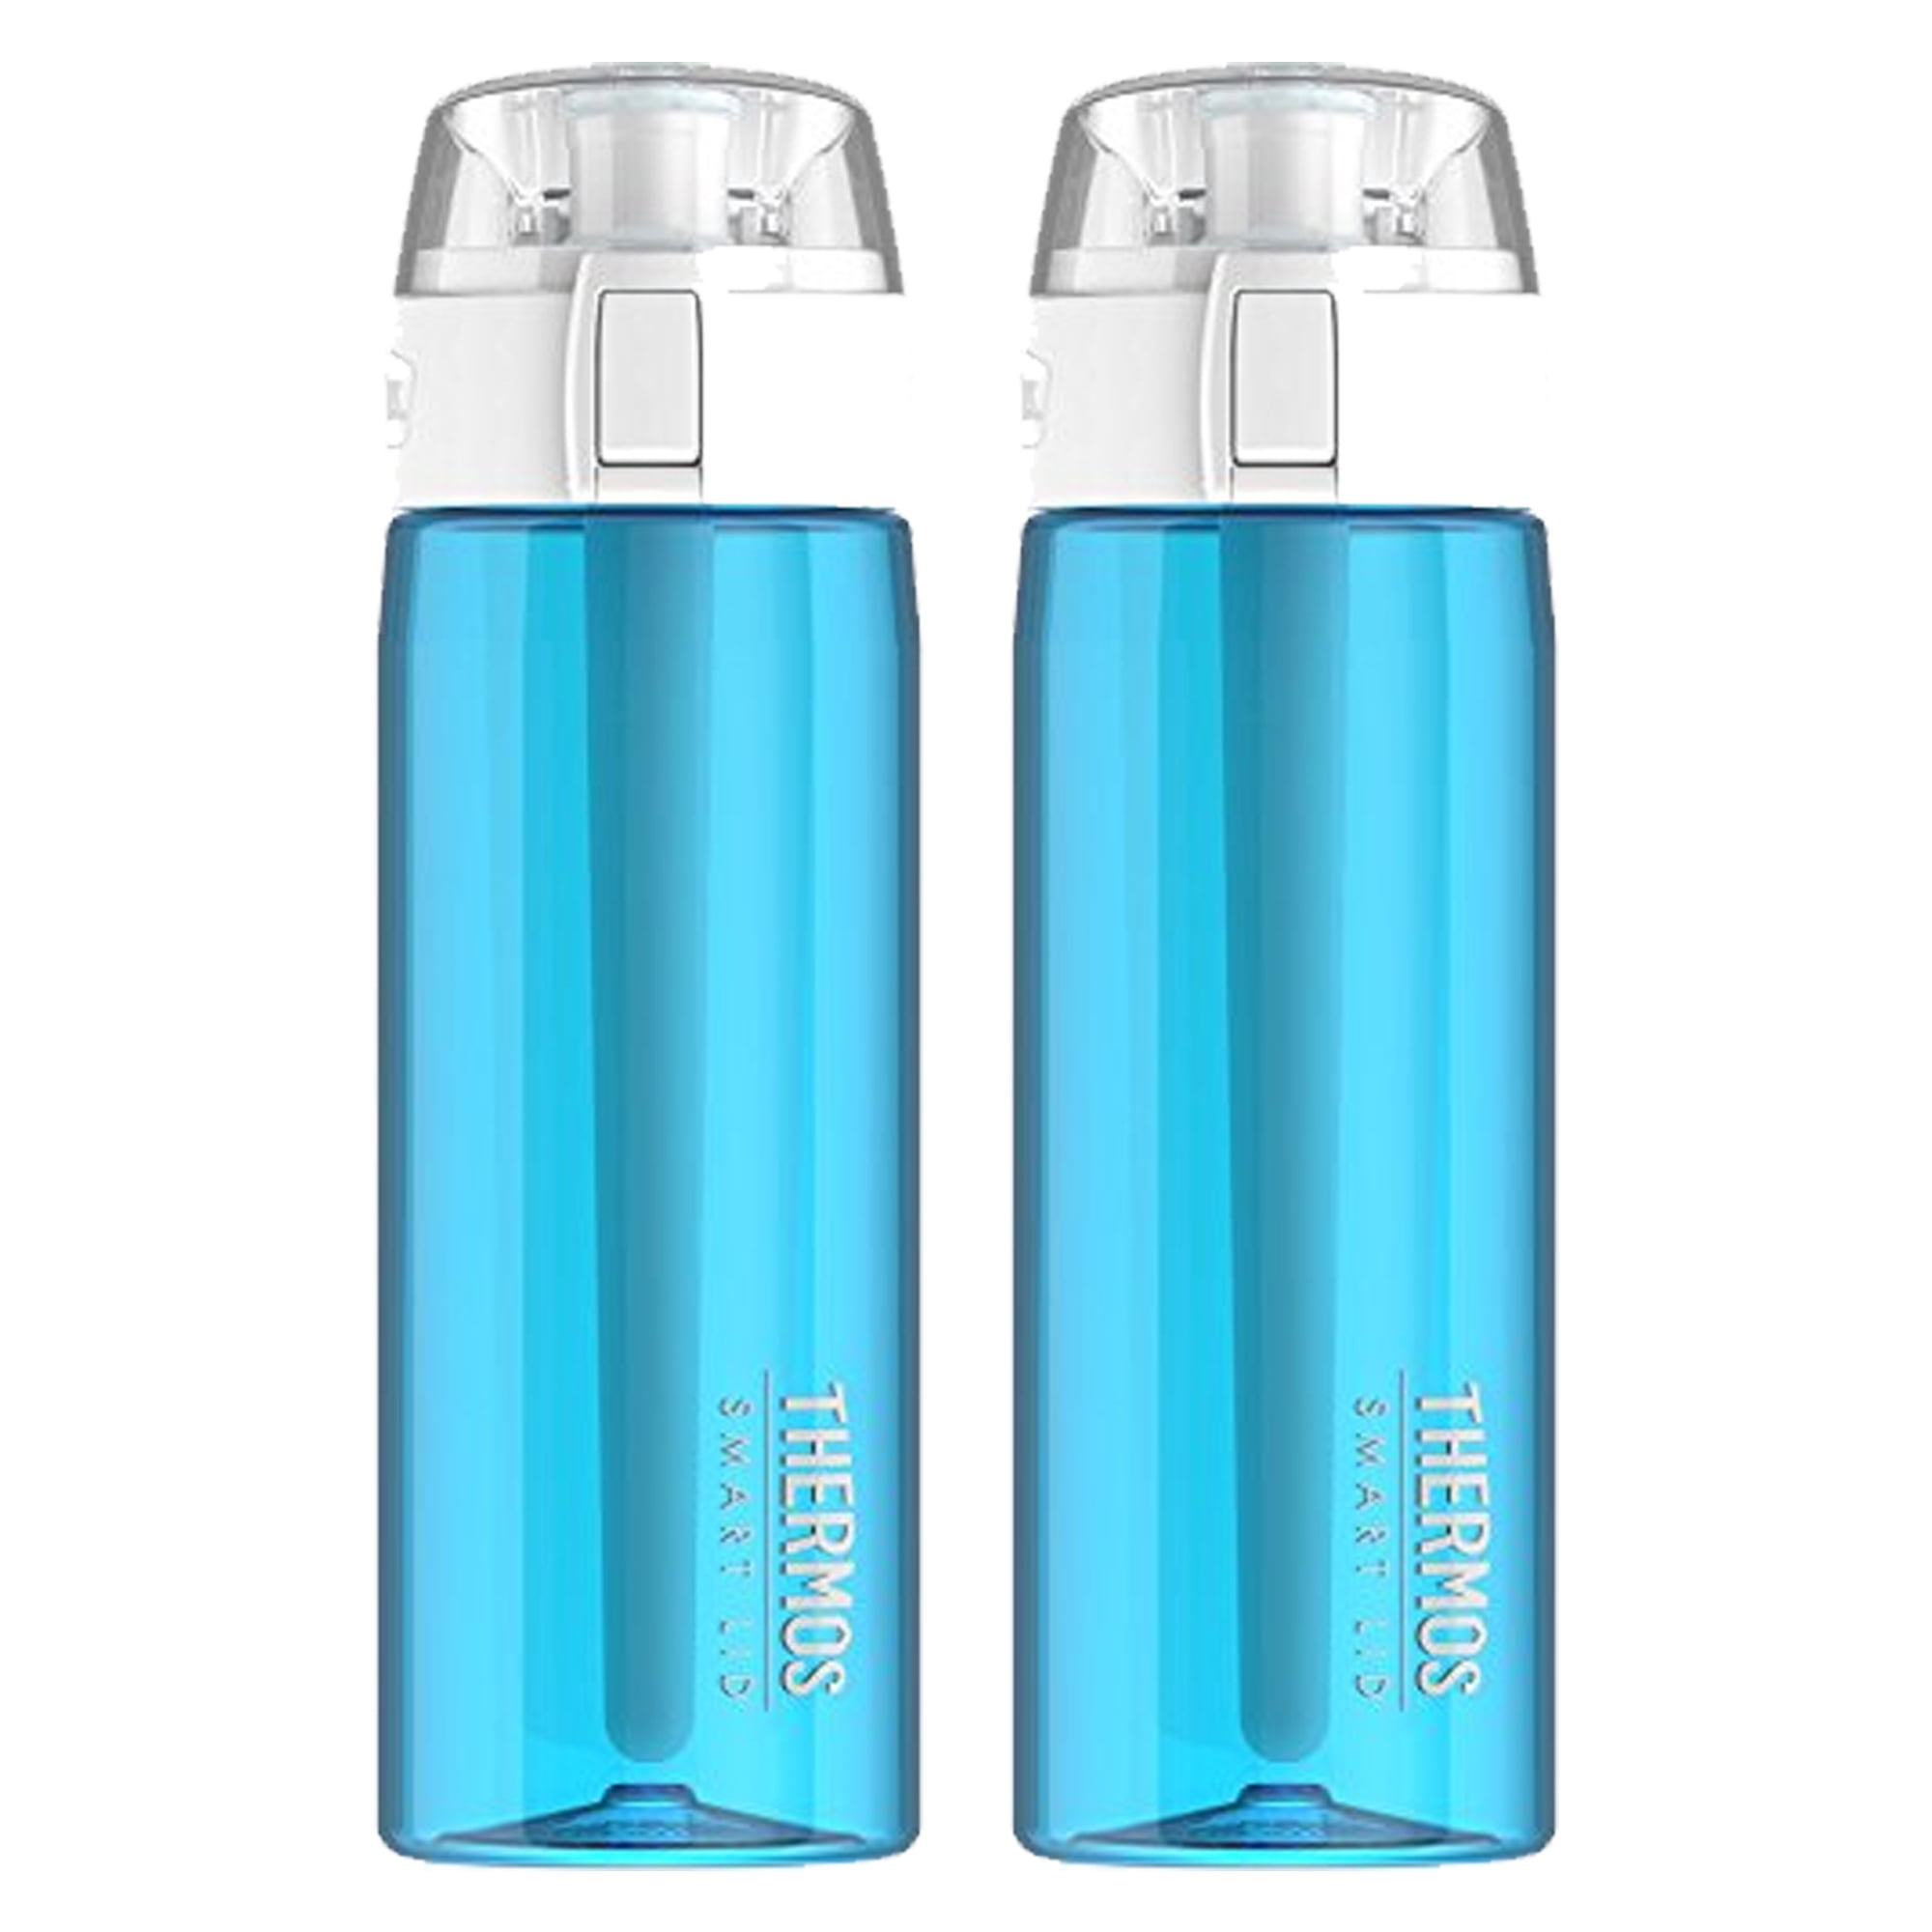 thermos smart lid water bottle